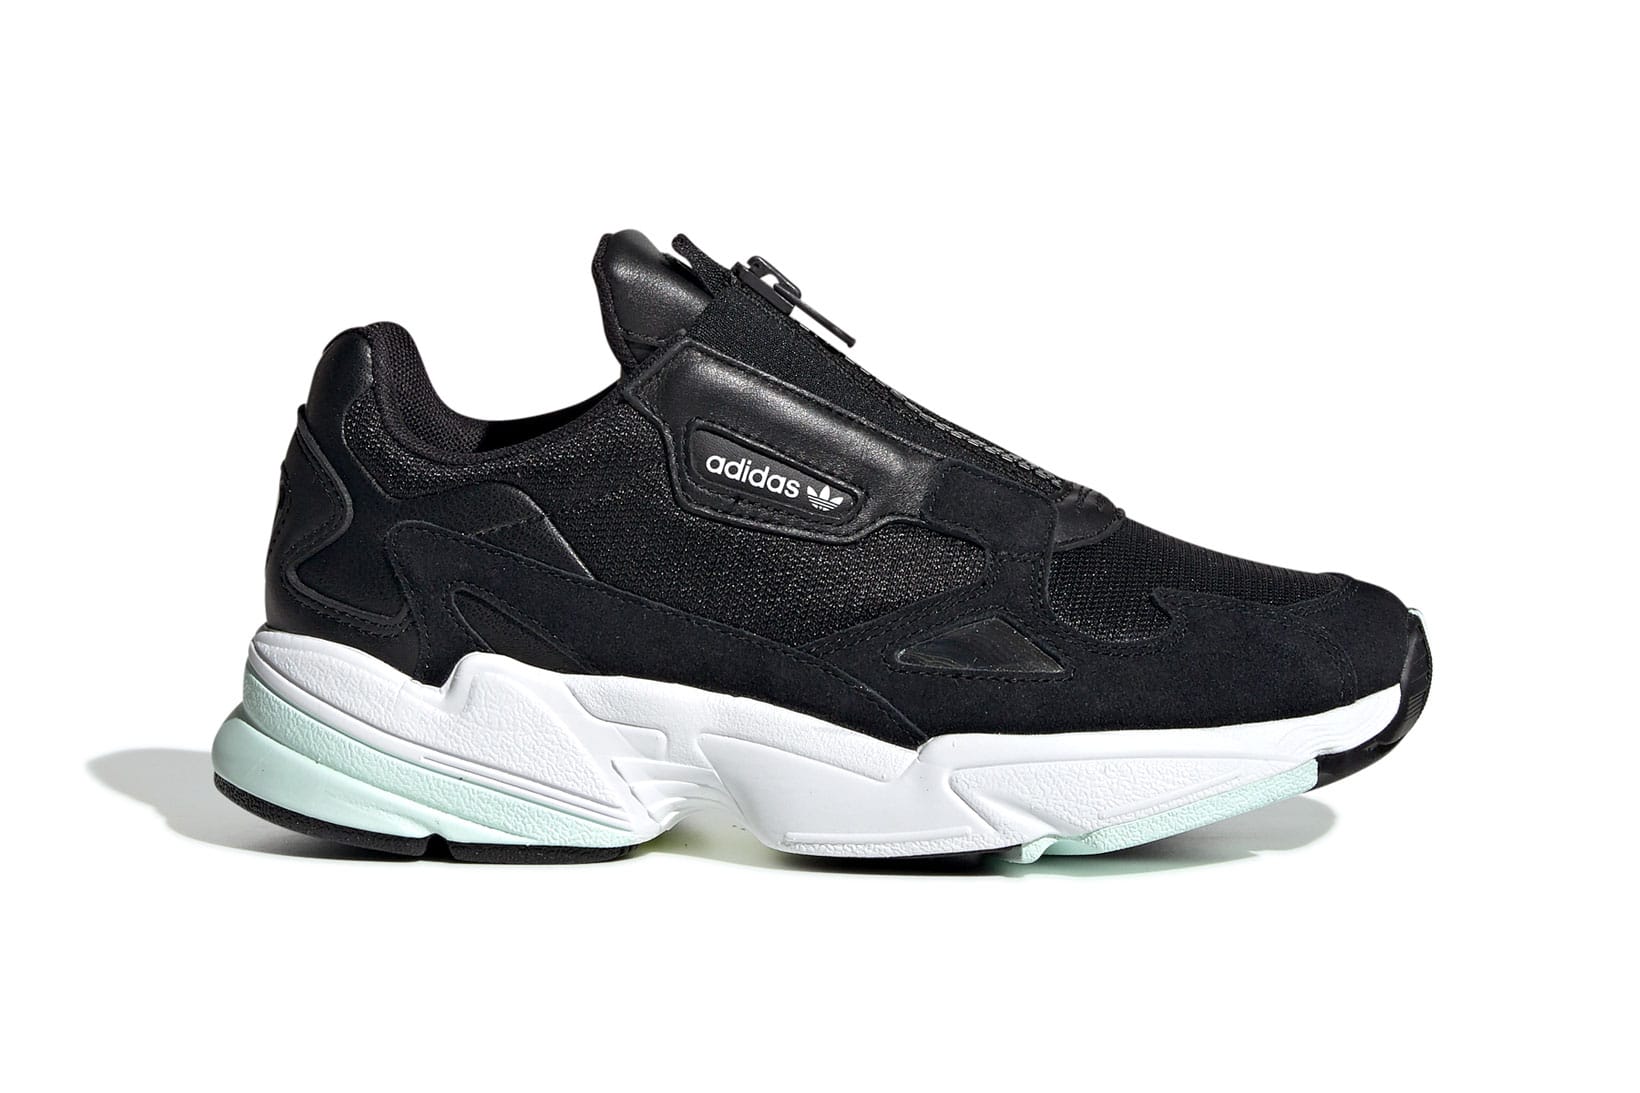 adidas Falcon Zip in Black and White 